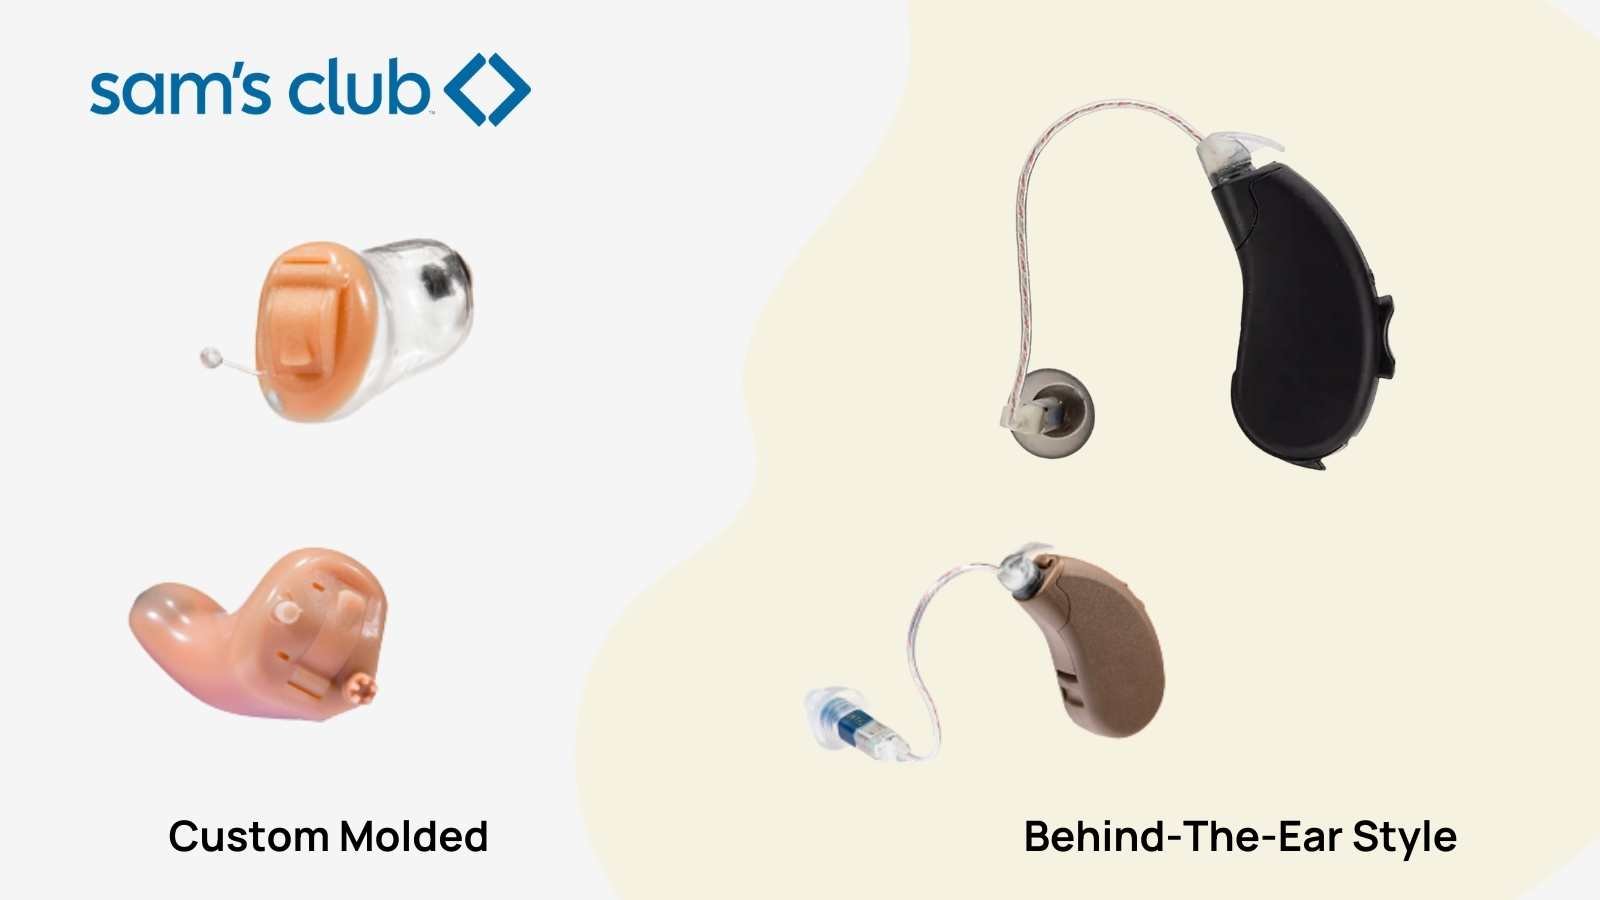 Hearing aid styles available at Sam's Club